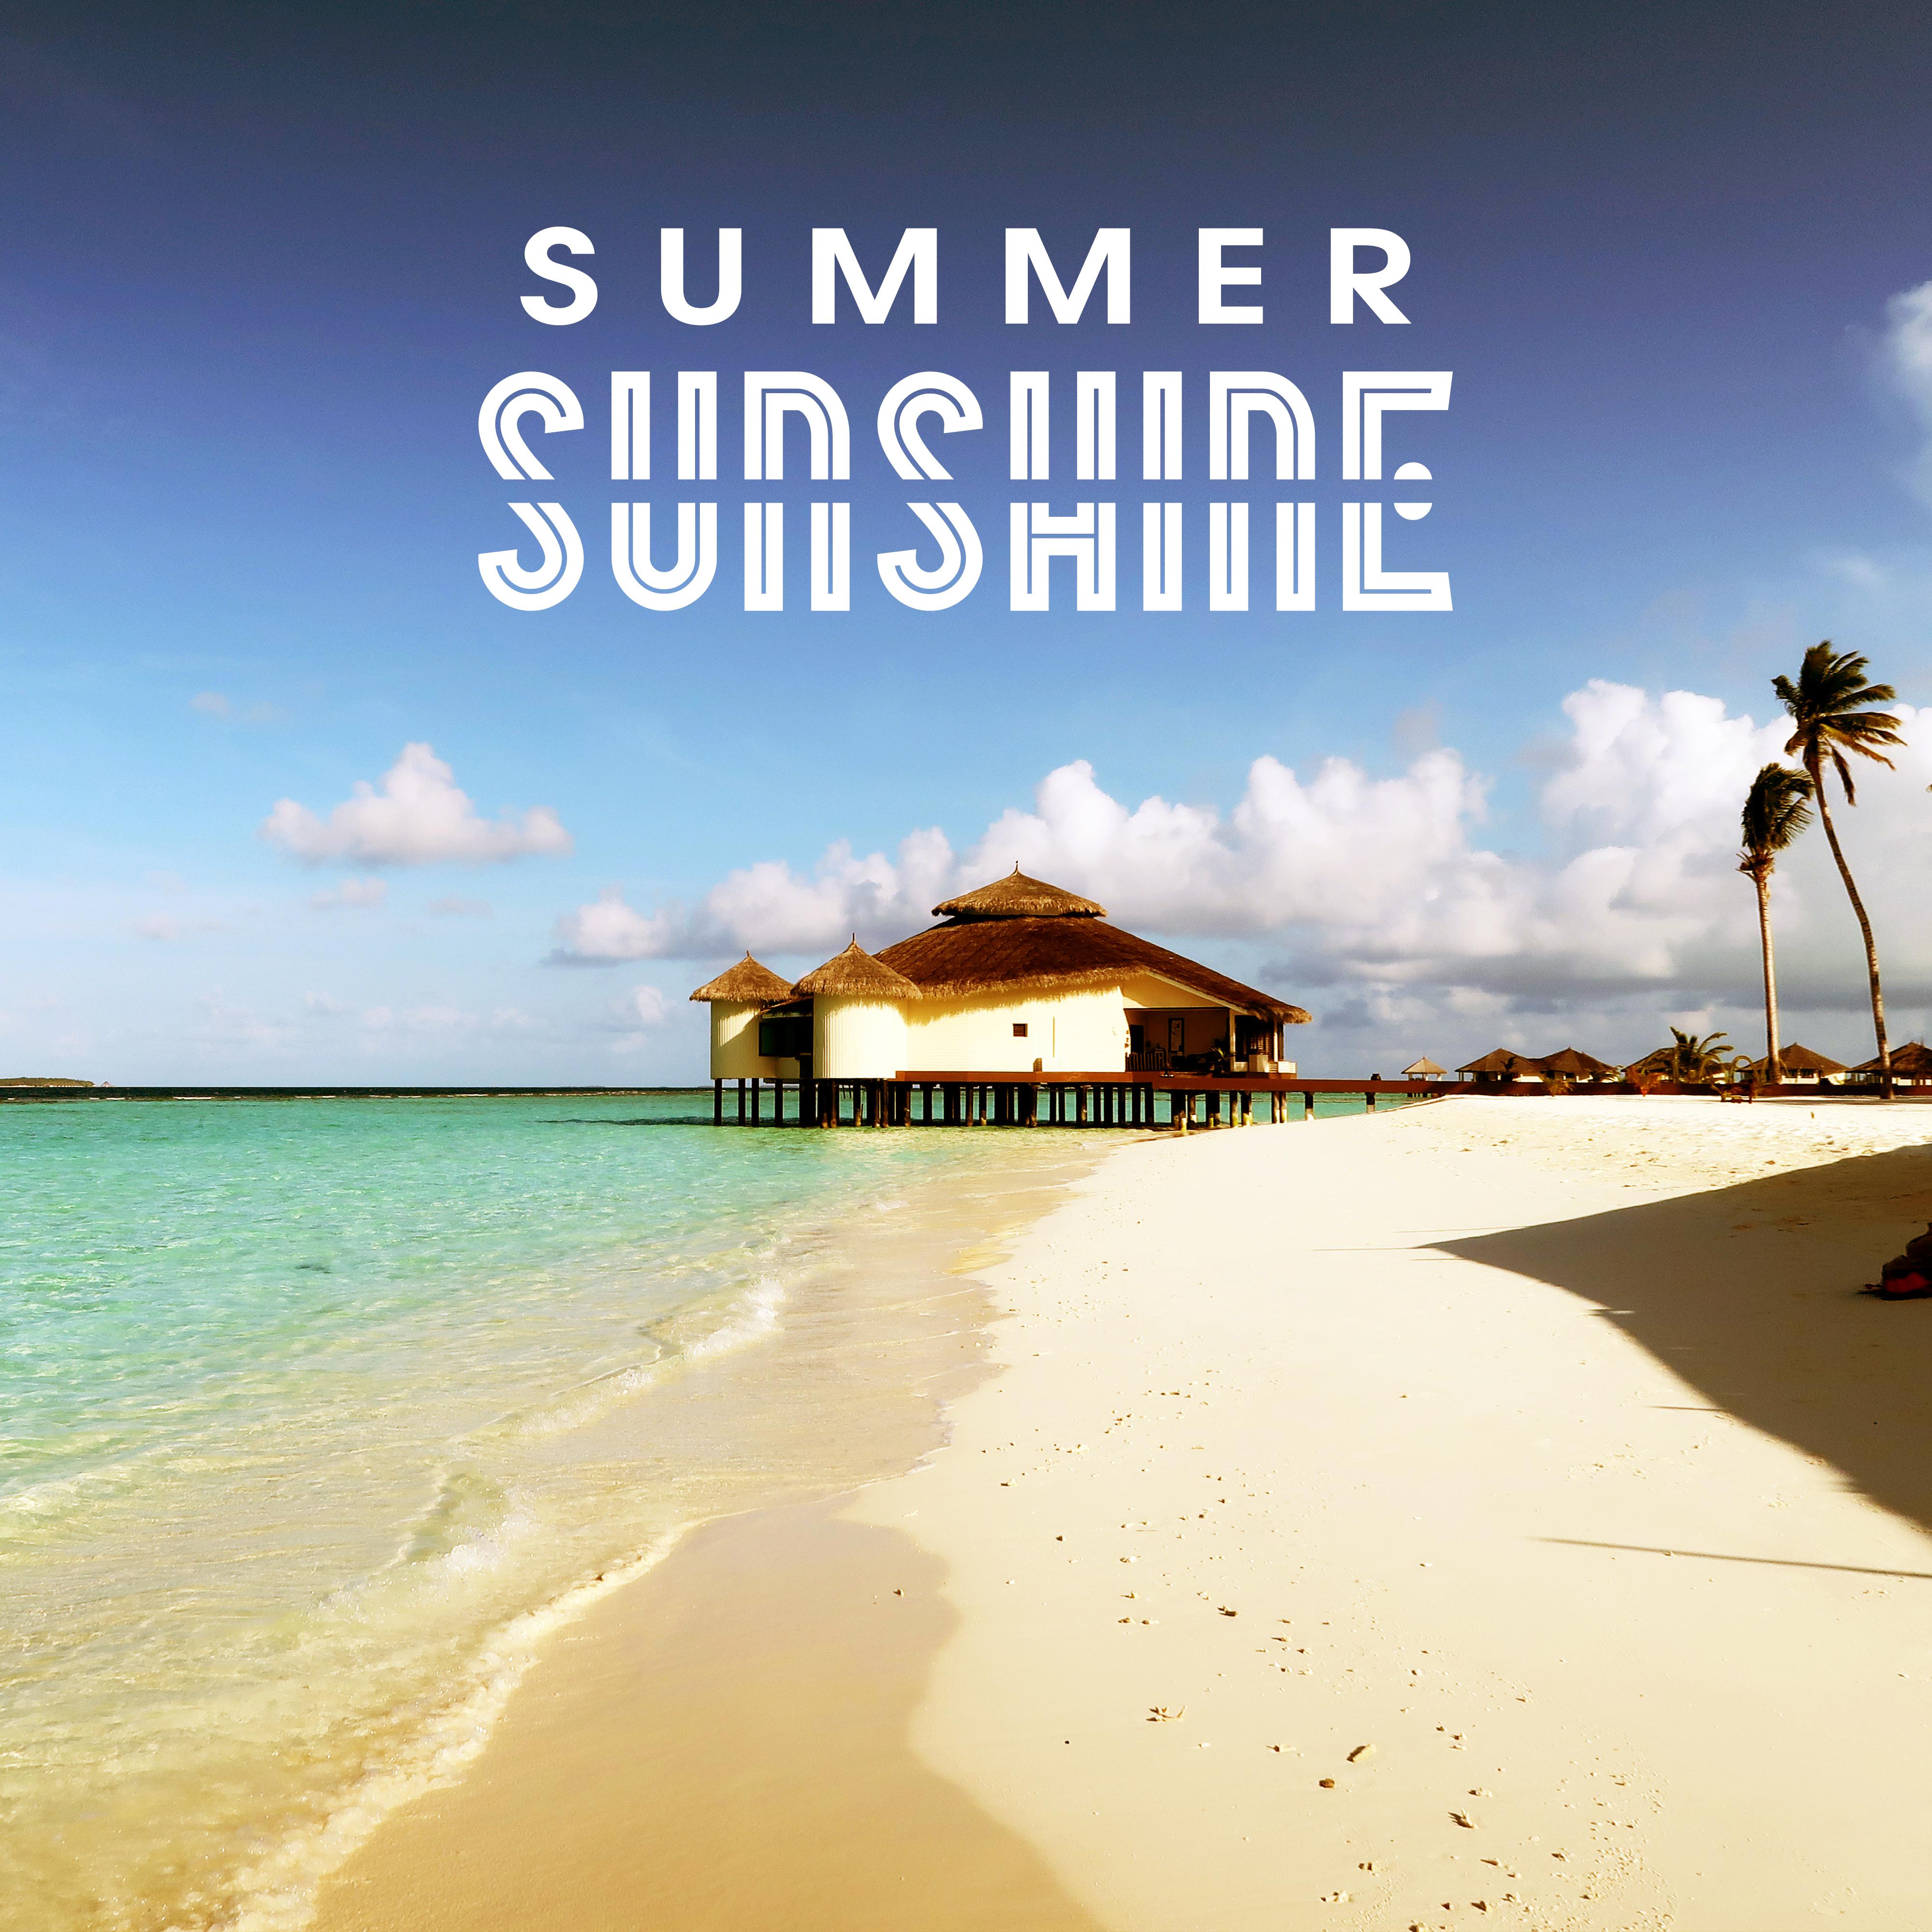 Summer Sunshine  Easy Listening, Summer Relaxation, Peaceful Holidays, Music to Rest